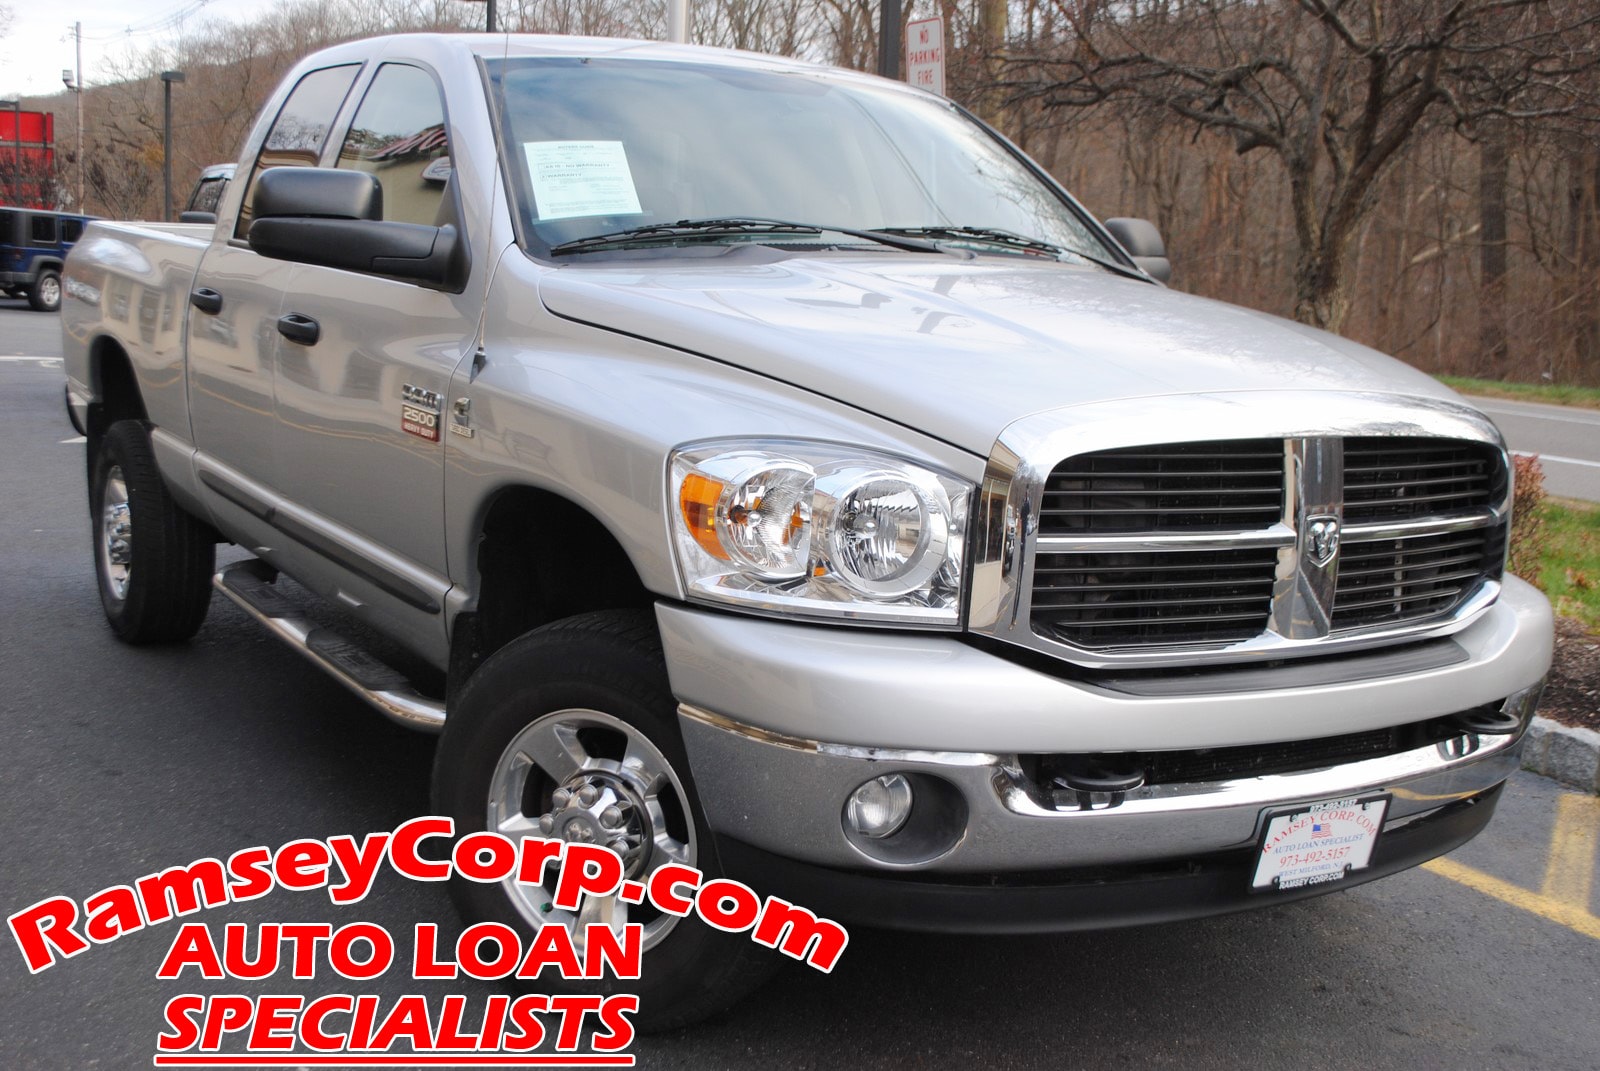 Used 2007 Dodge Ram 2500 For Sale at Ramsey Corp. | VIN: 1D7KS28C37J553376